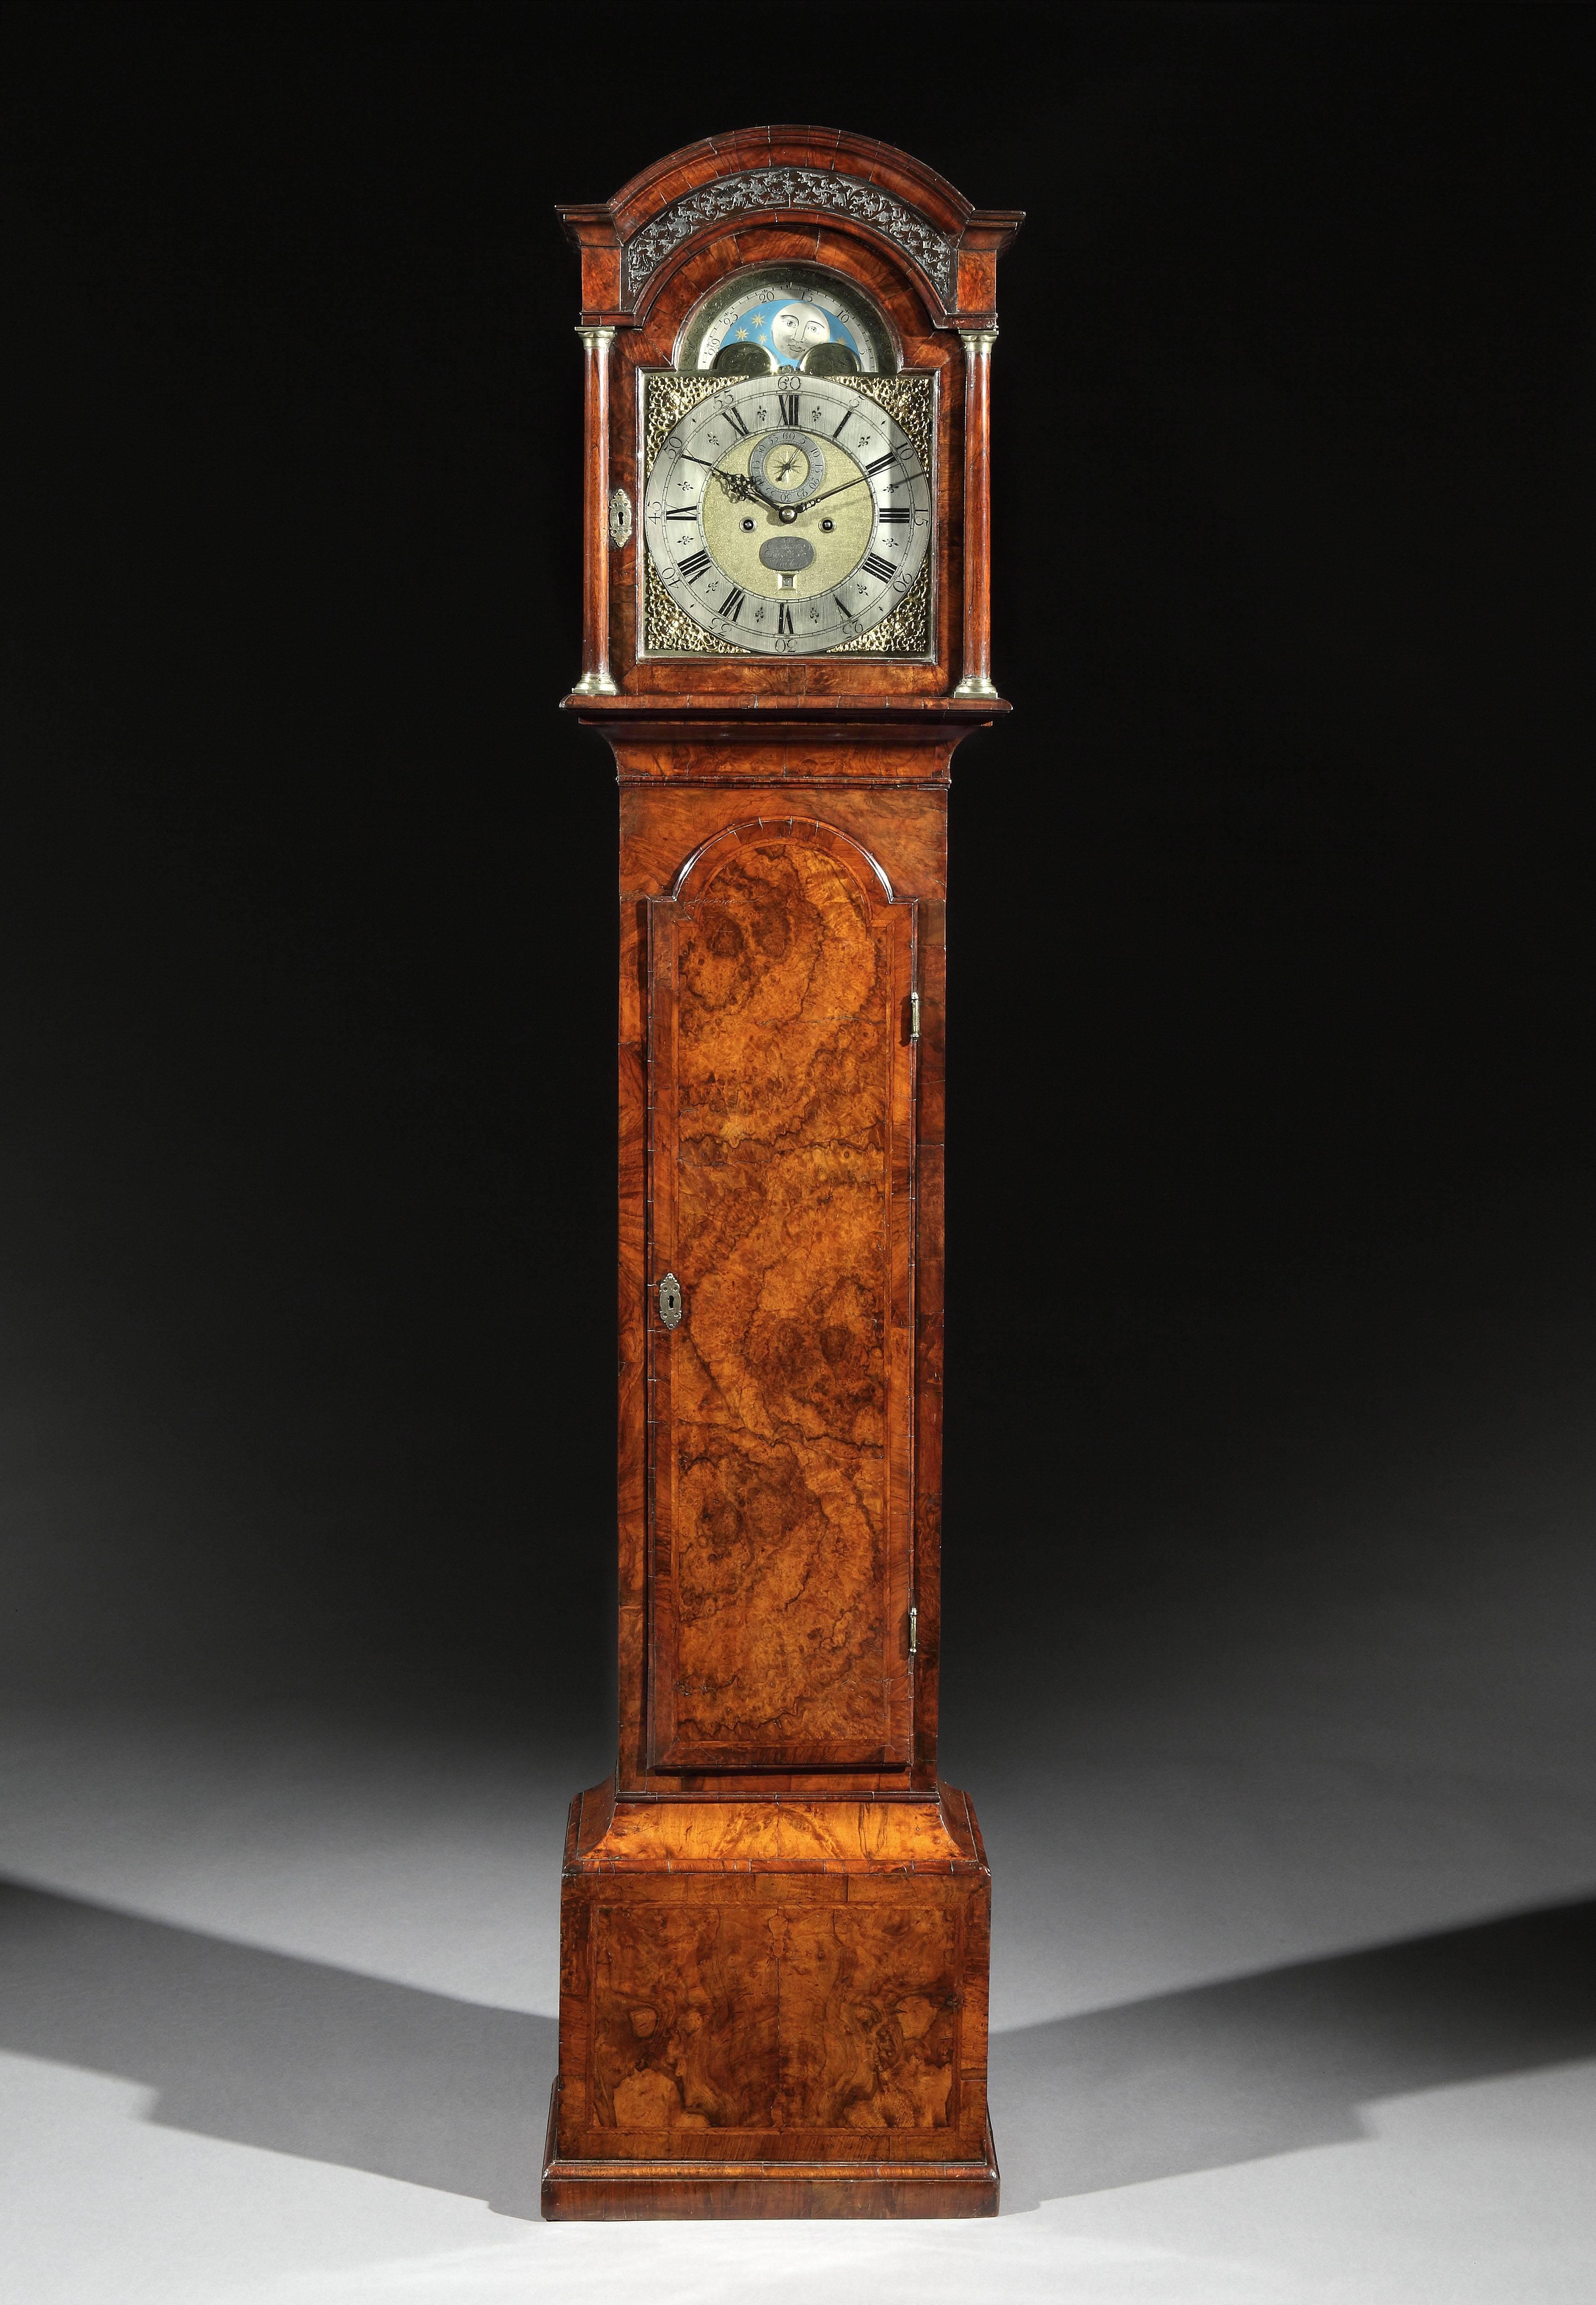 An early George II figured walnut long case clock of elegant proportions, inlaid and cross-banded throughout. The slim case standing on a moulded plinth, the arched hood with a panel of fretwork flanked by tapering columns. The movement with an